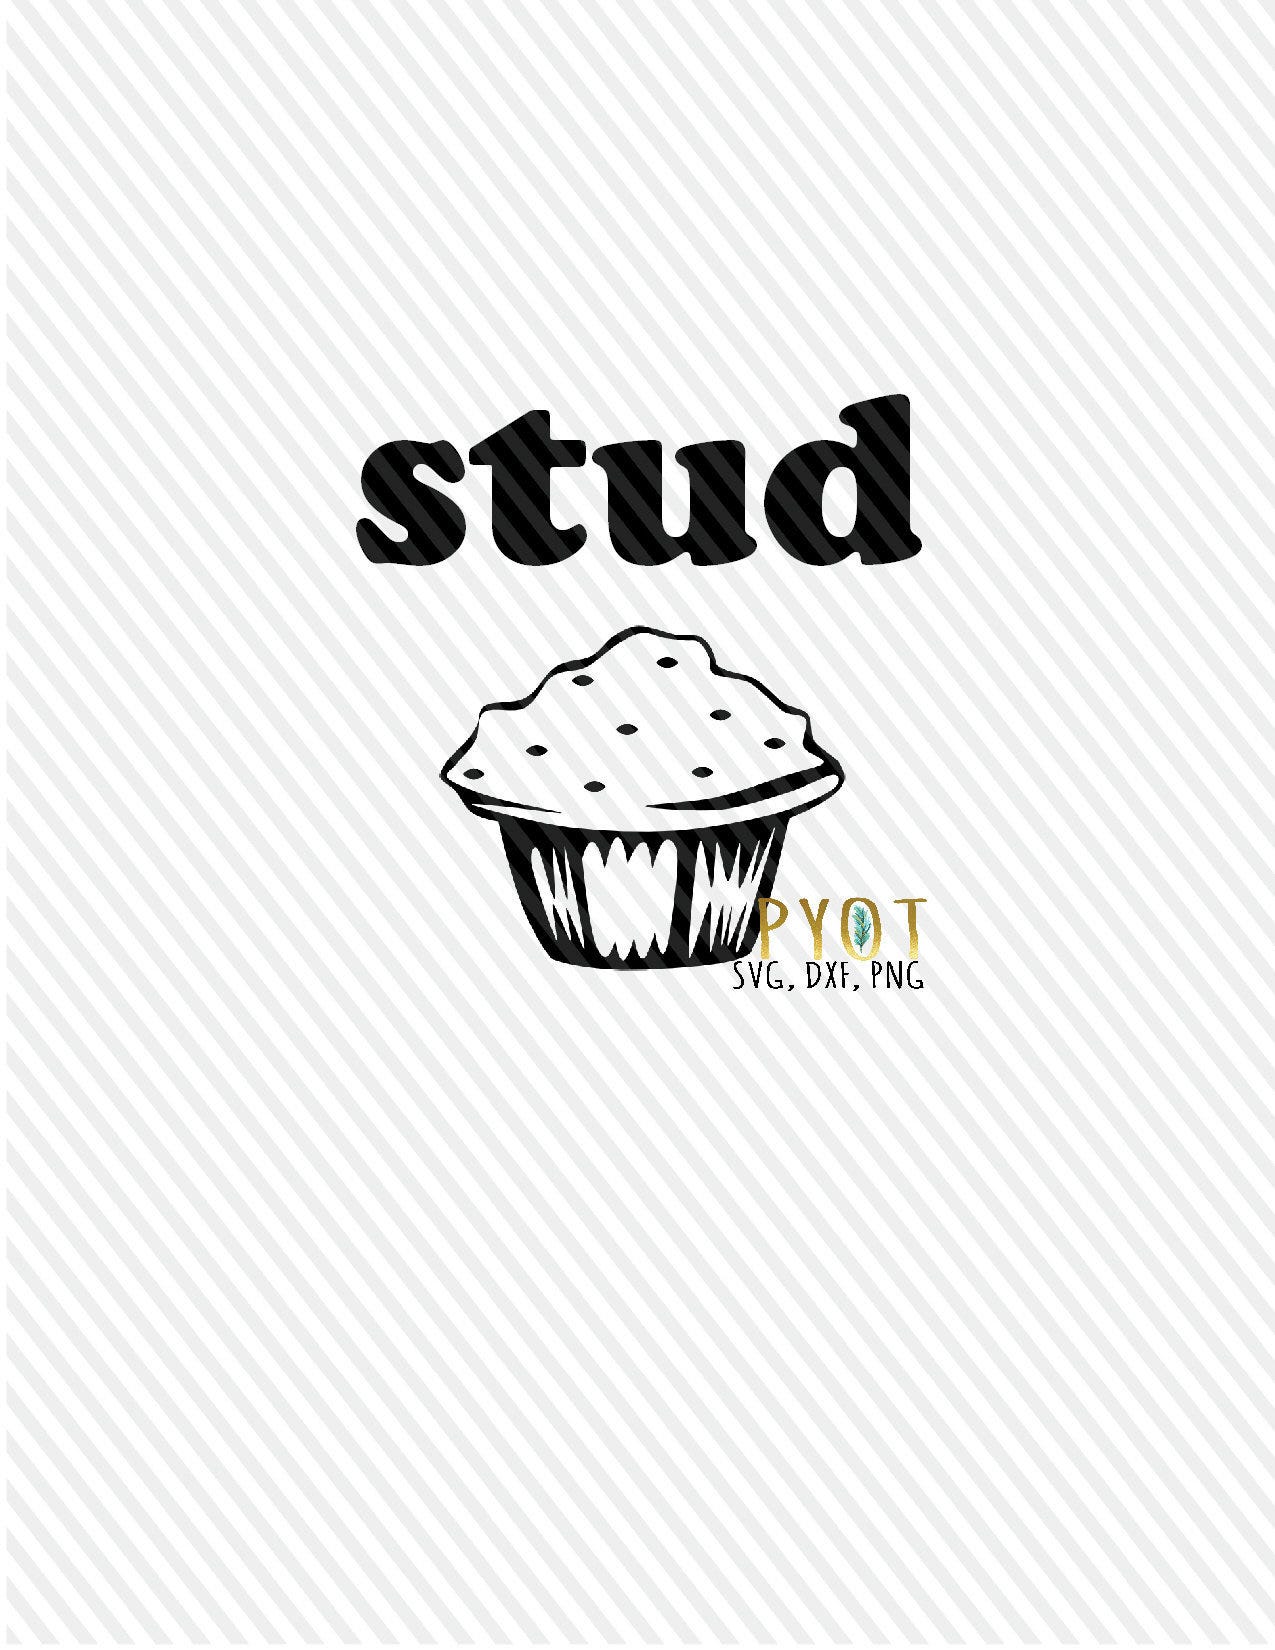 Stud Muffin SVG, DXF, PNG